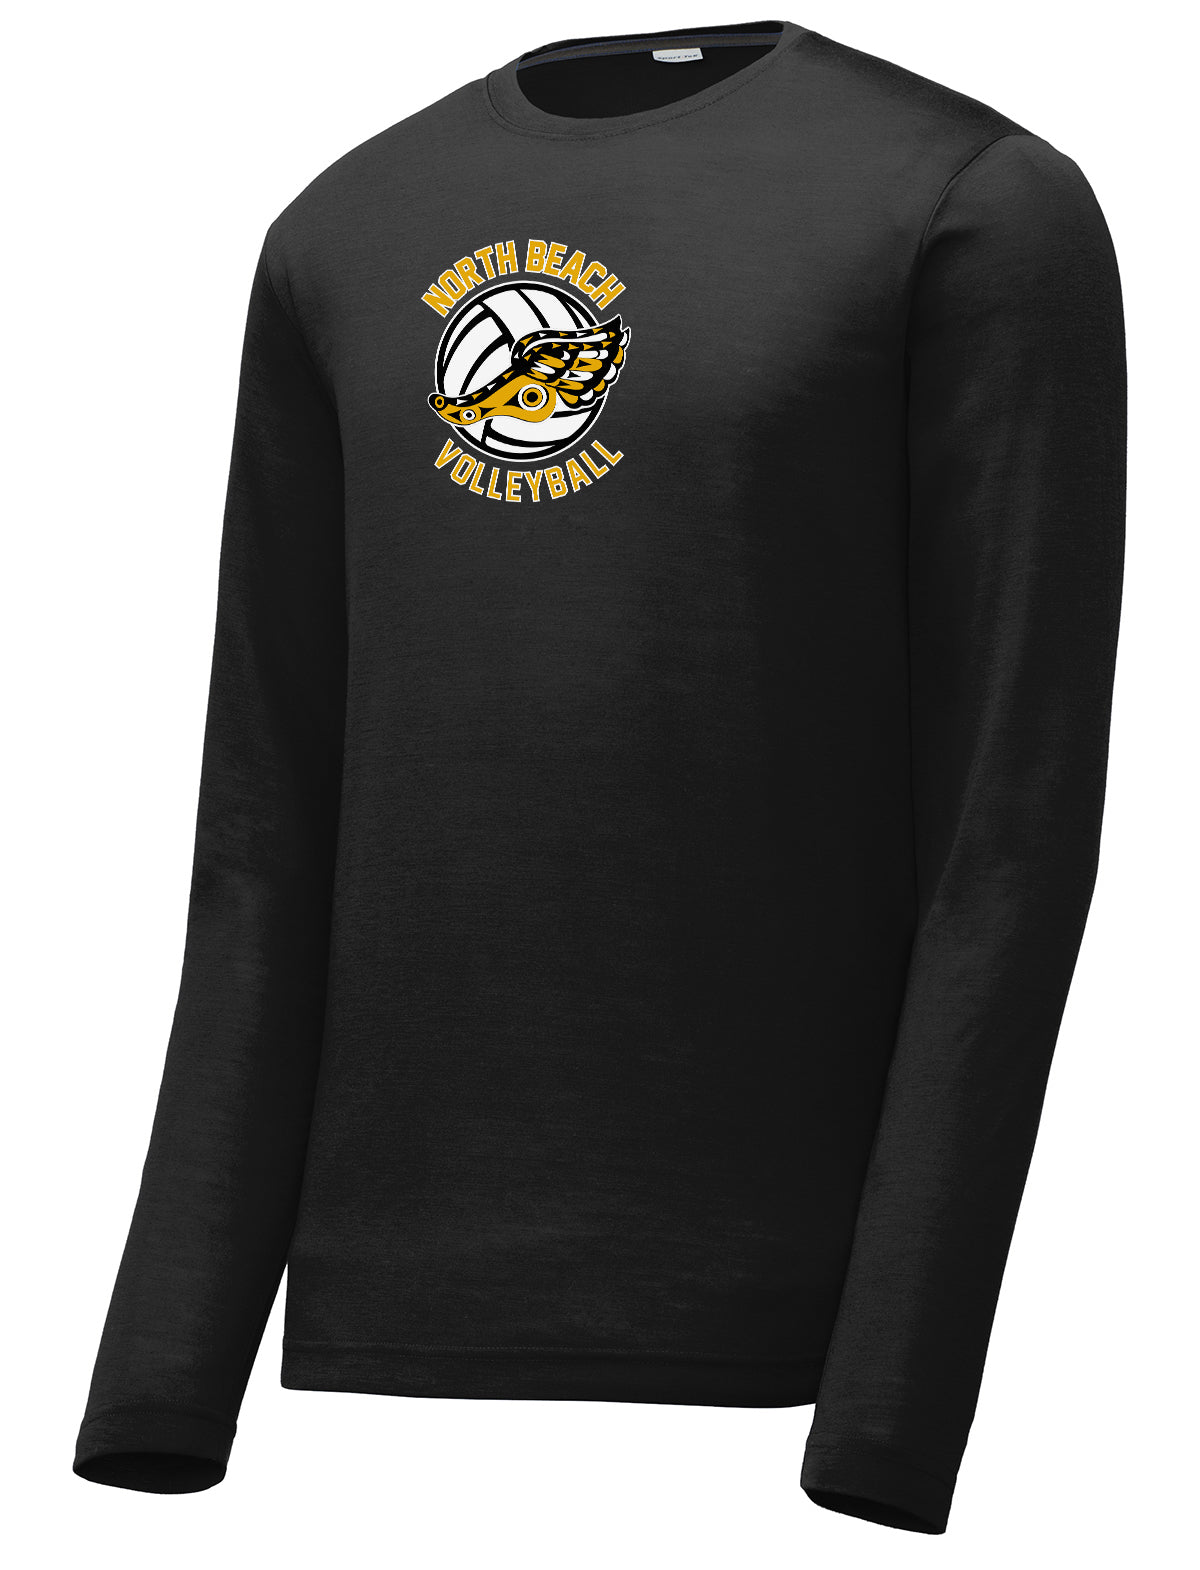 North Beach Volleyball Long Sleeve CottonTouch Performance Shirt